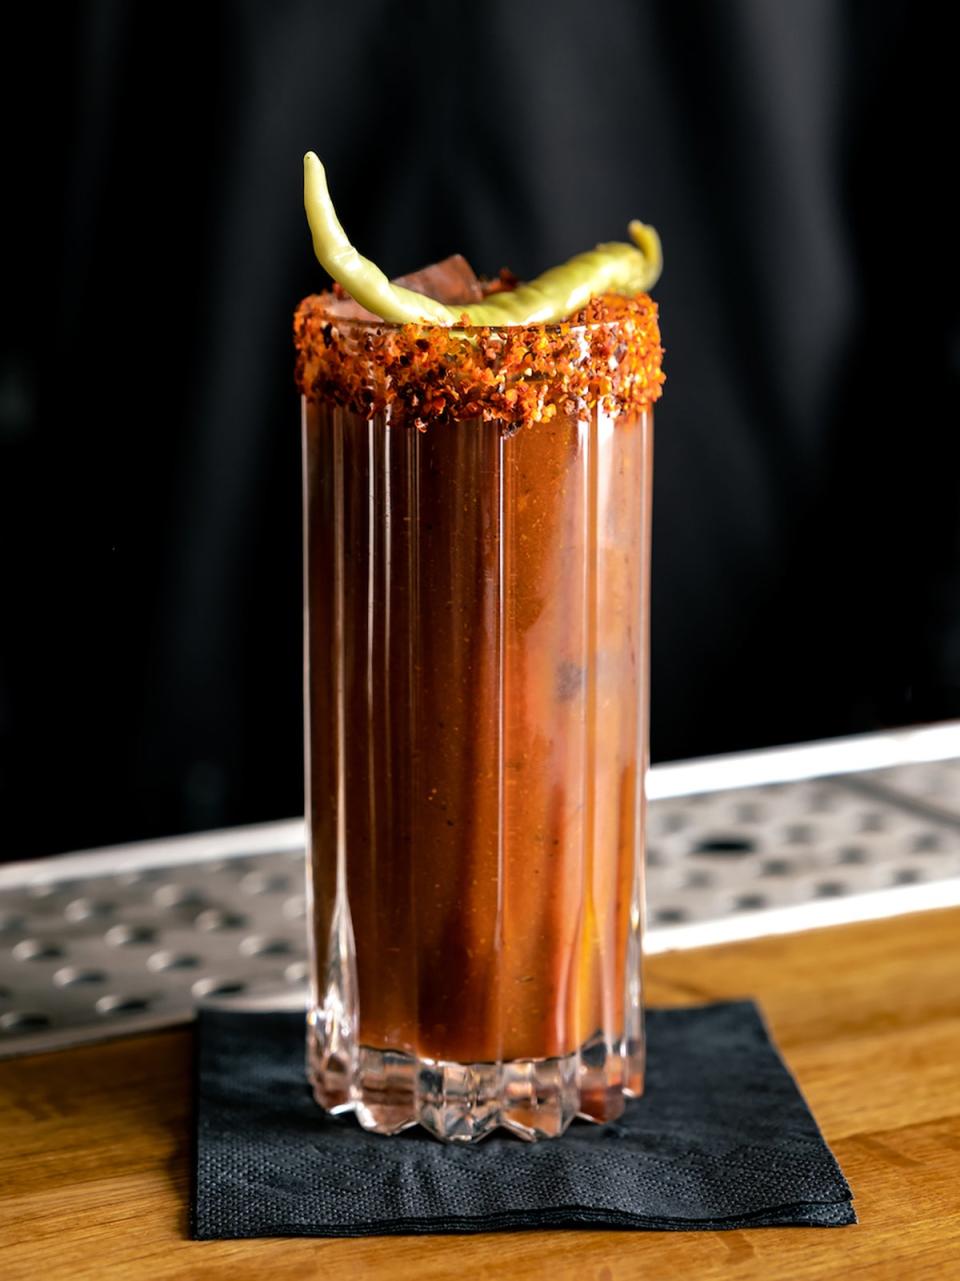 Brunch isn’t complete without a bloody mary (Mike Sim)